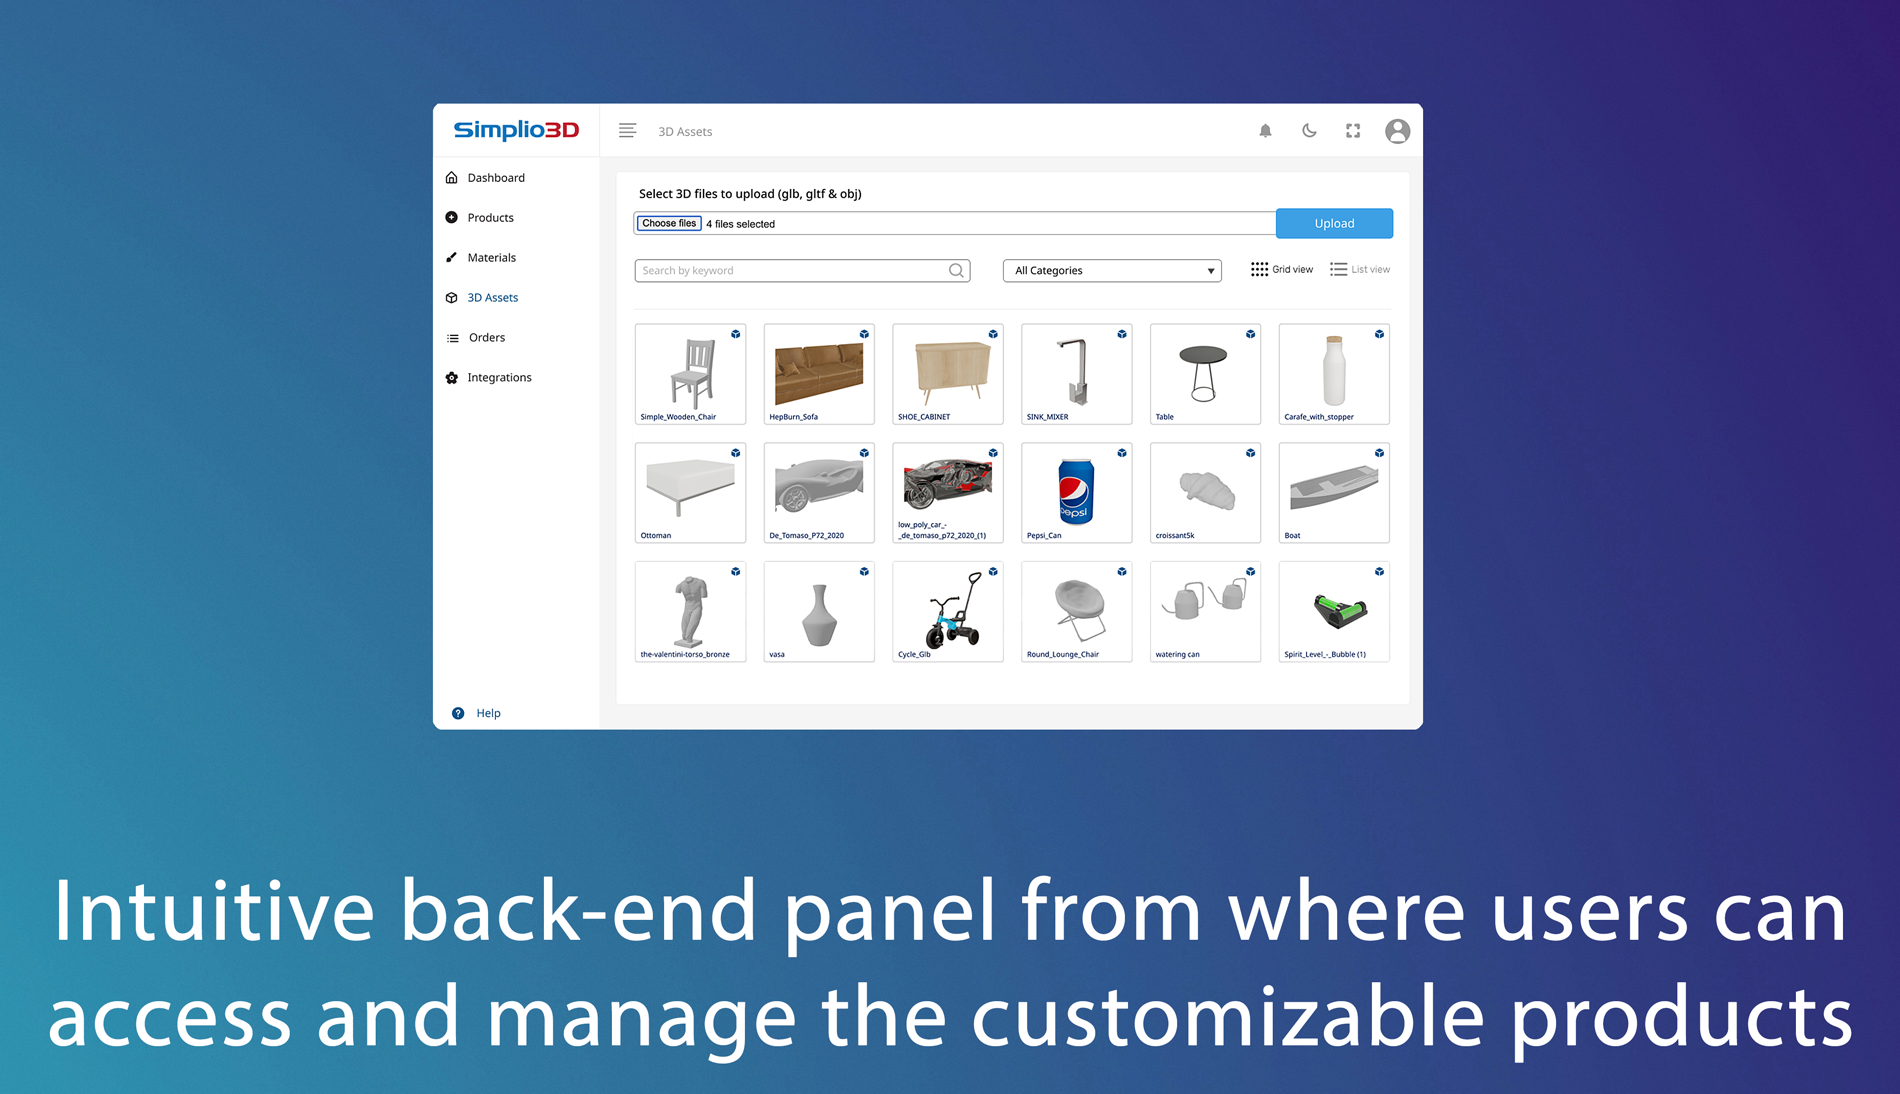 Intuitive back-end panel from where users can access and manage the customizable products